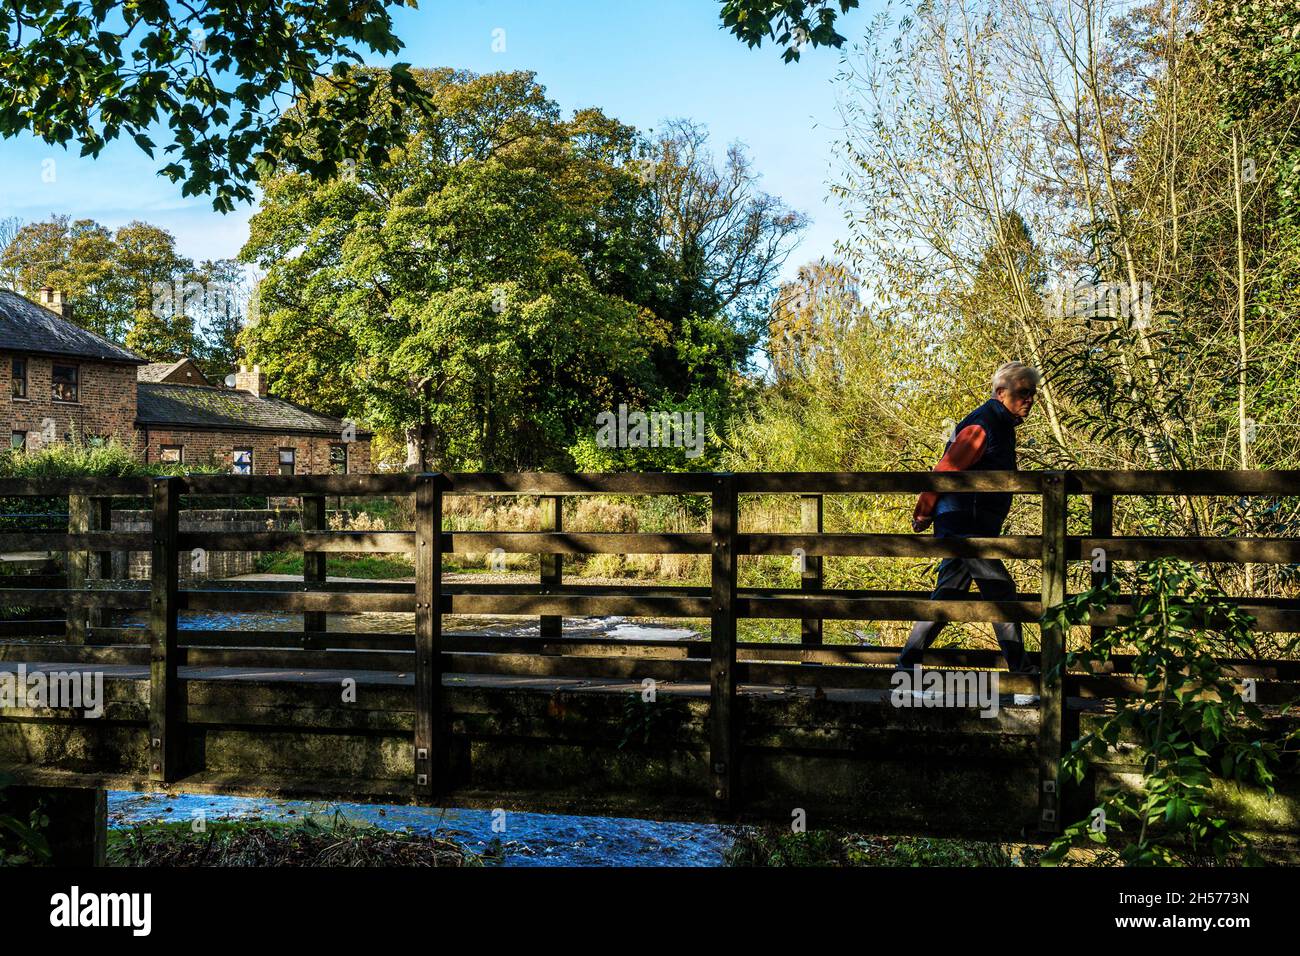 Wooden footbridge across the Skell River with a man walking through it with coloured trees in the background on an autumn day, Ripon, England, UK. Stock Photo